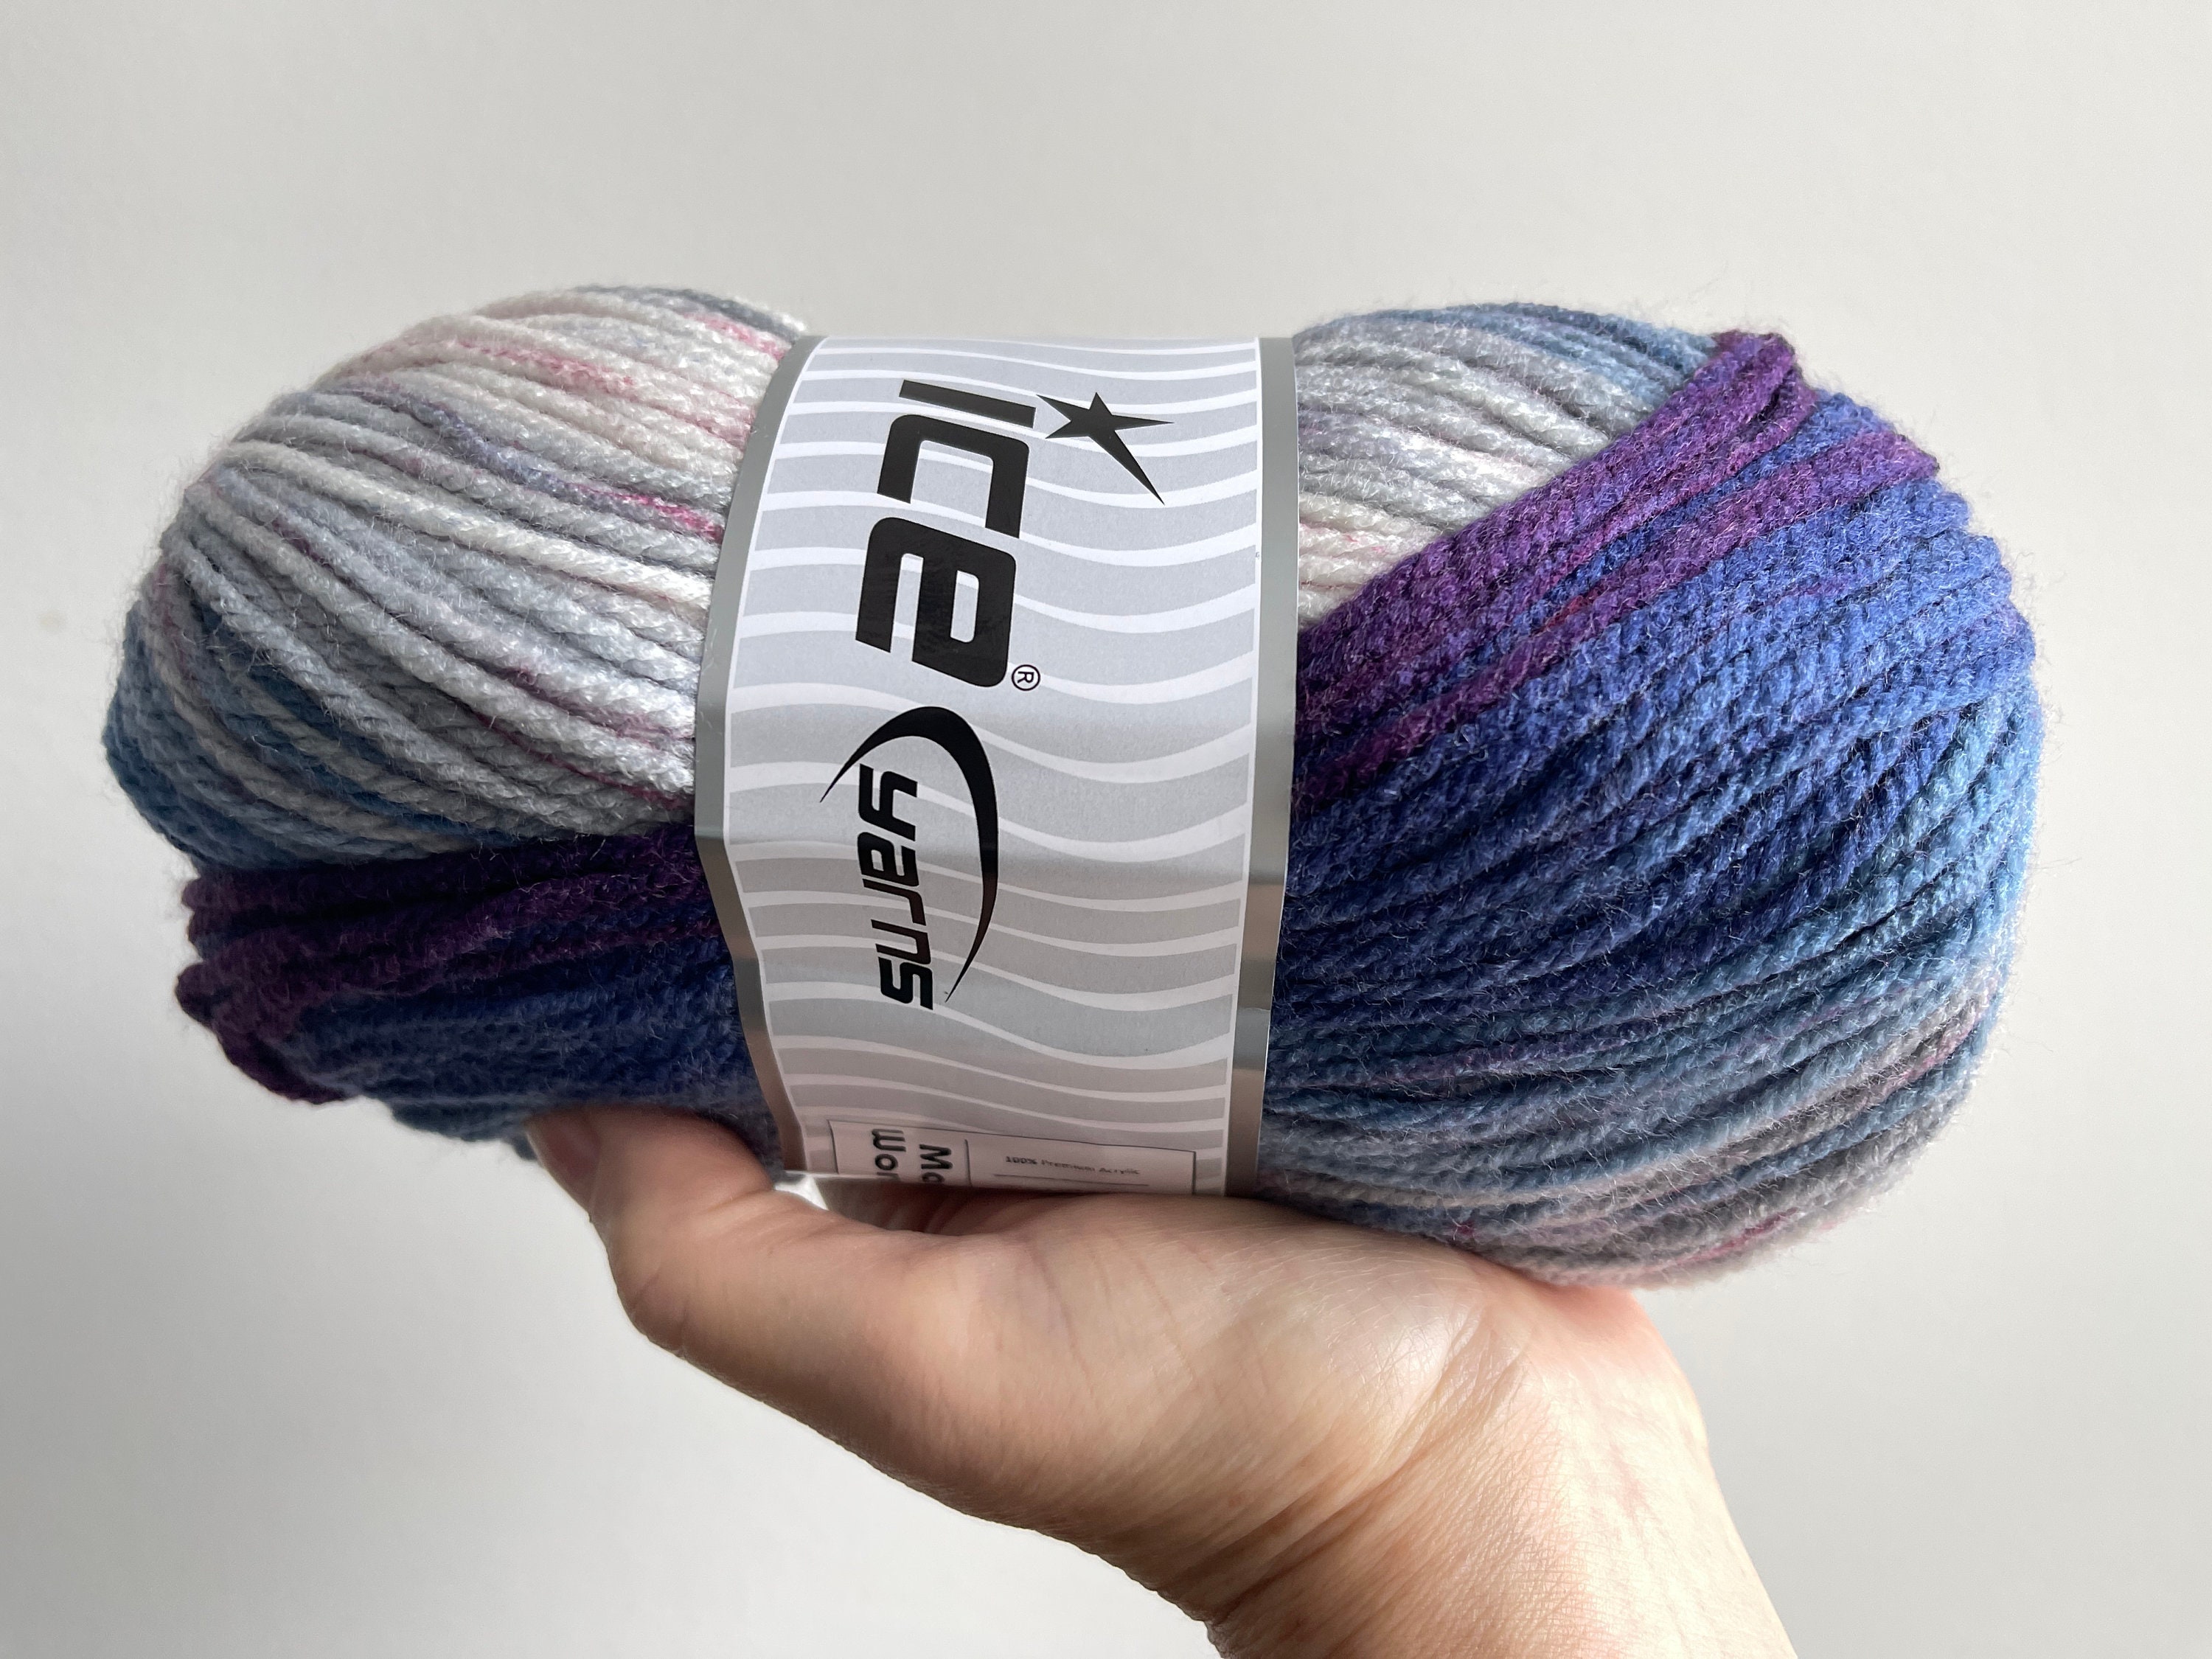 Magic Worsted Yarn - Blues Grey White + Self-Striping Acrylic, Worsted Weight 202 Yards (185 meters) 3.53 Ounces (100 Grams)